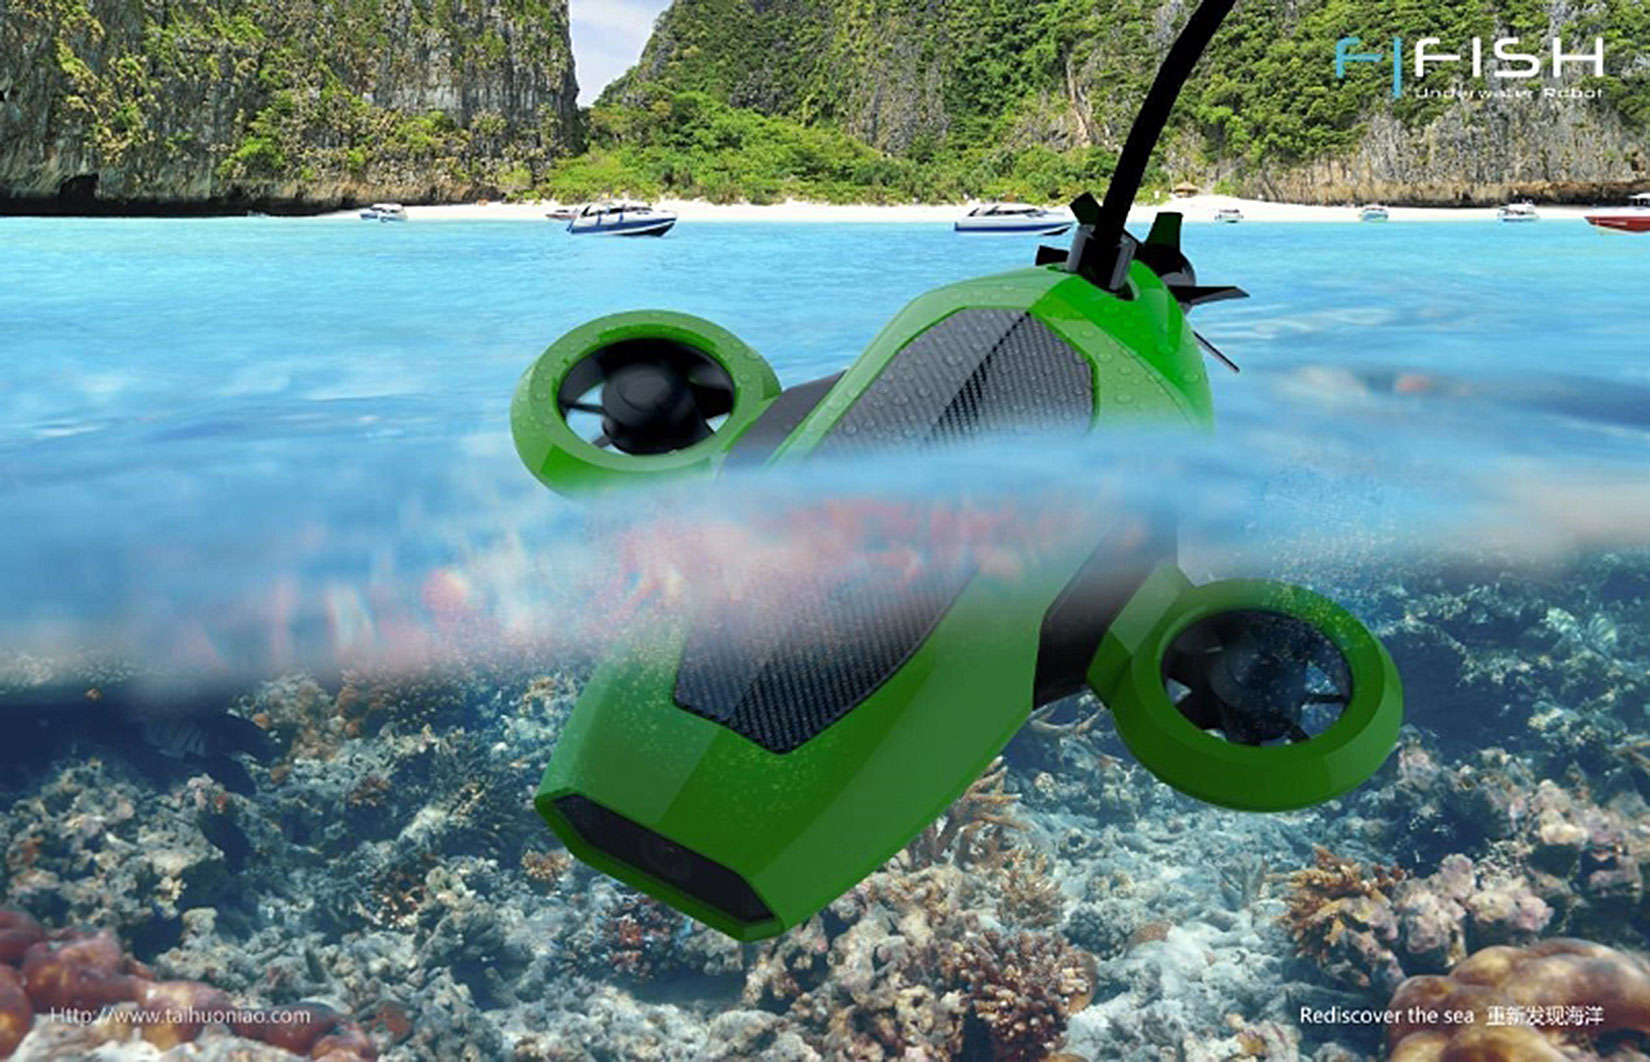 The FiFish Atlantis hopes to the first consumer drone of the seas.